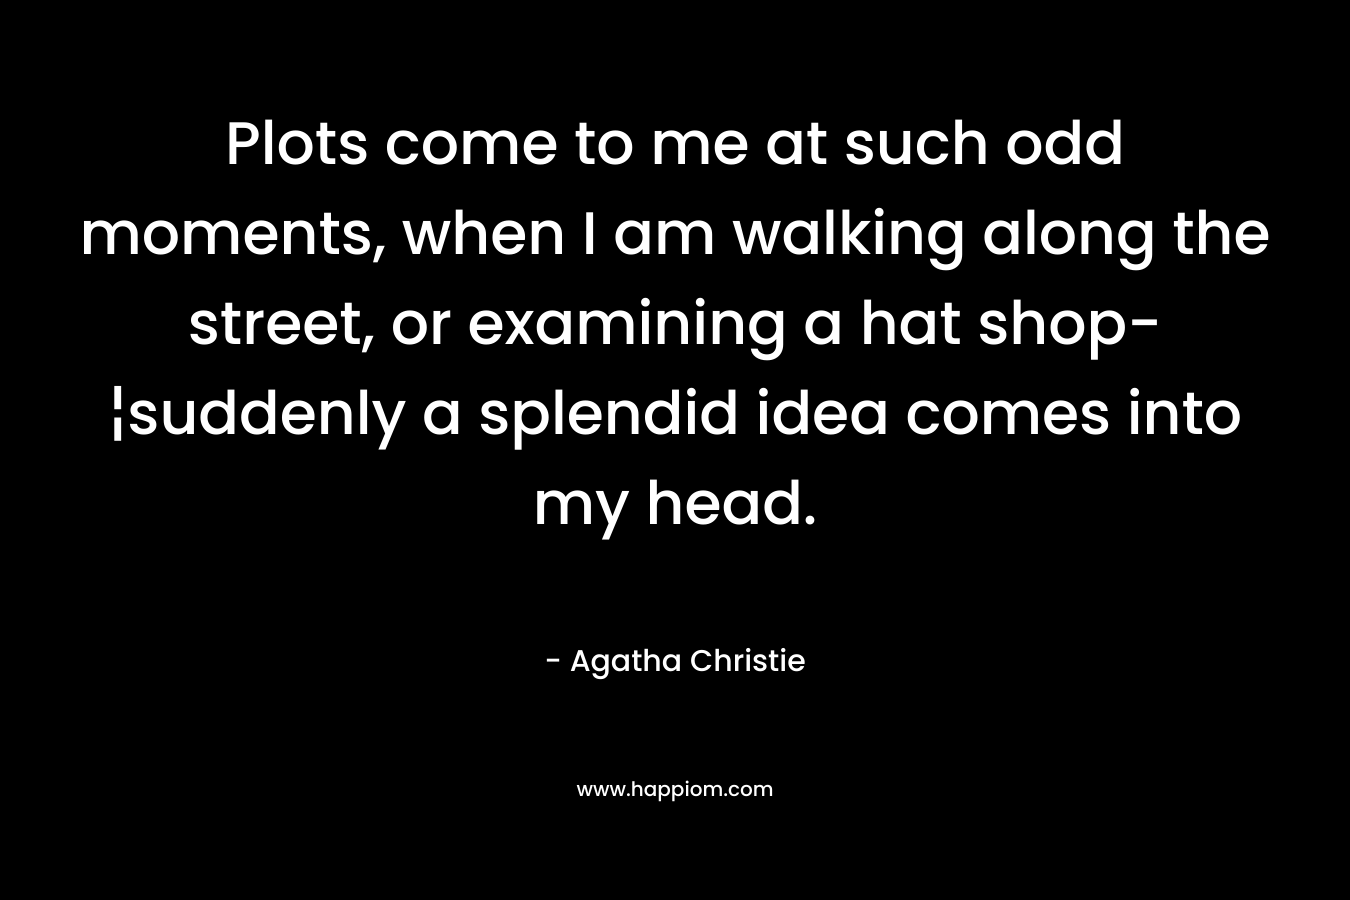 Plots come to me at such odd moments, when I am walking along the street, or examining a hat shop-¦suddenly a splendid idea comes into my head. – Agatha Christie